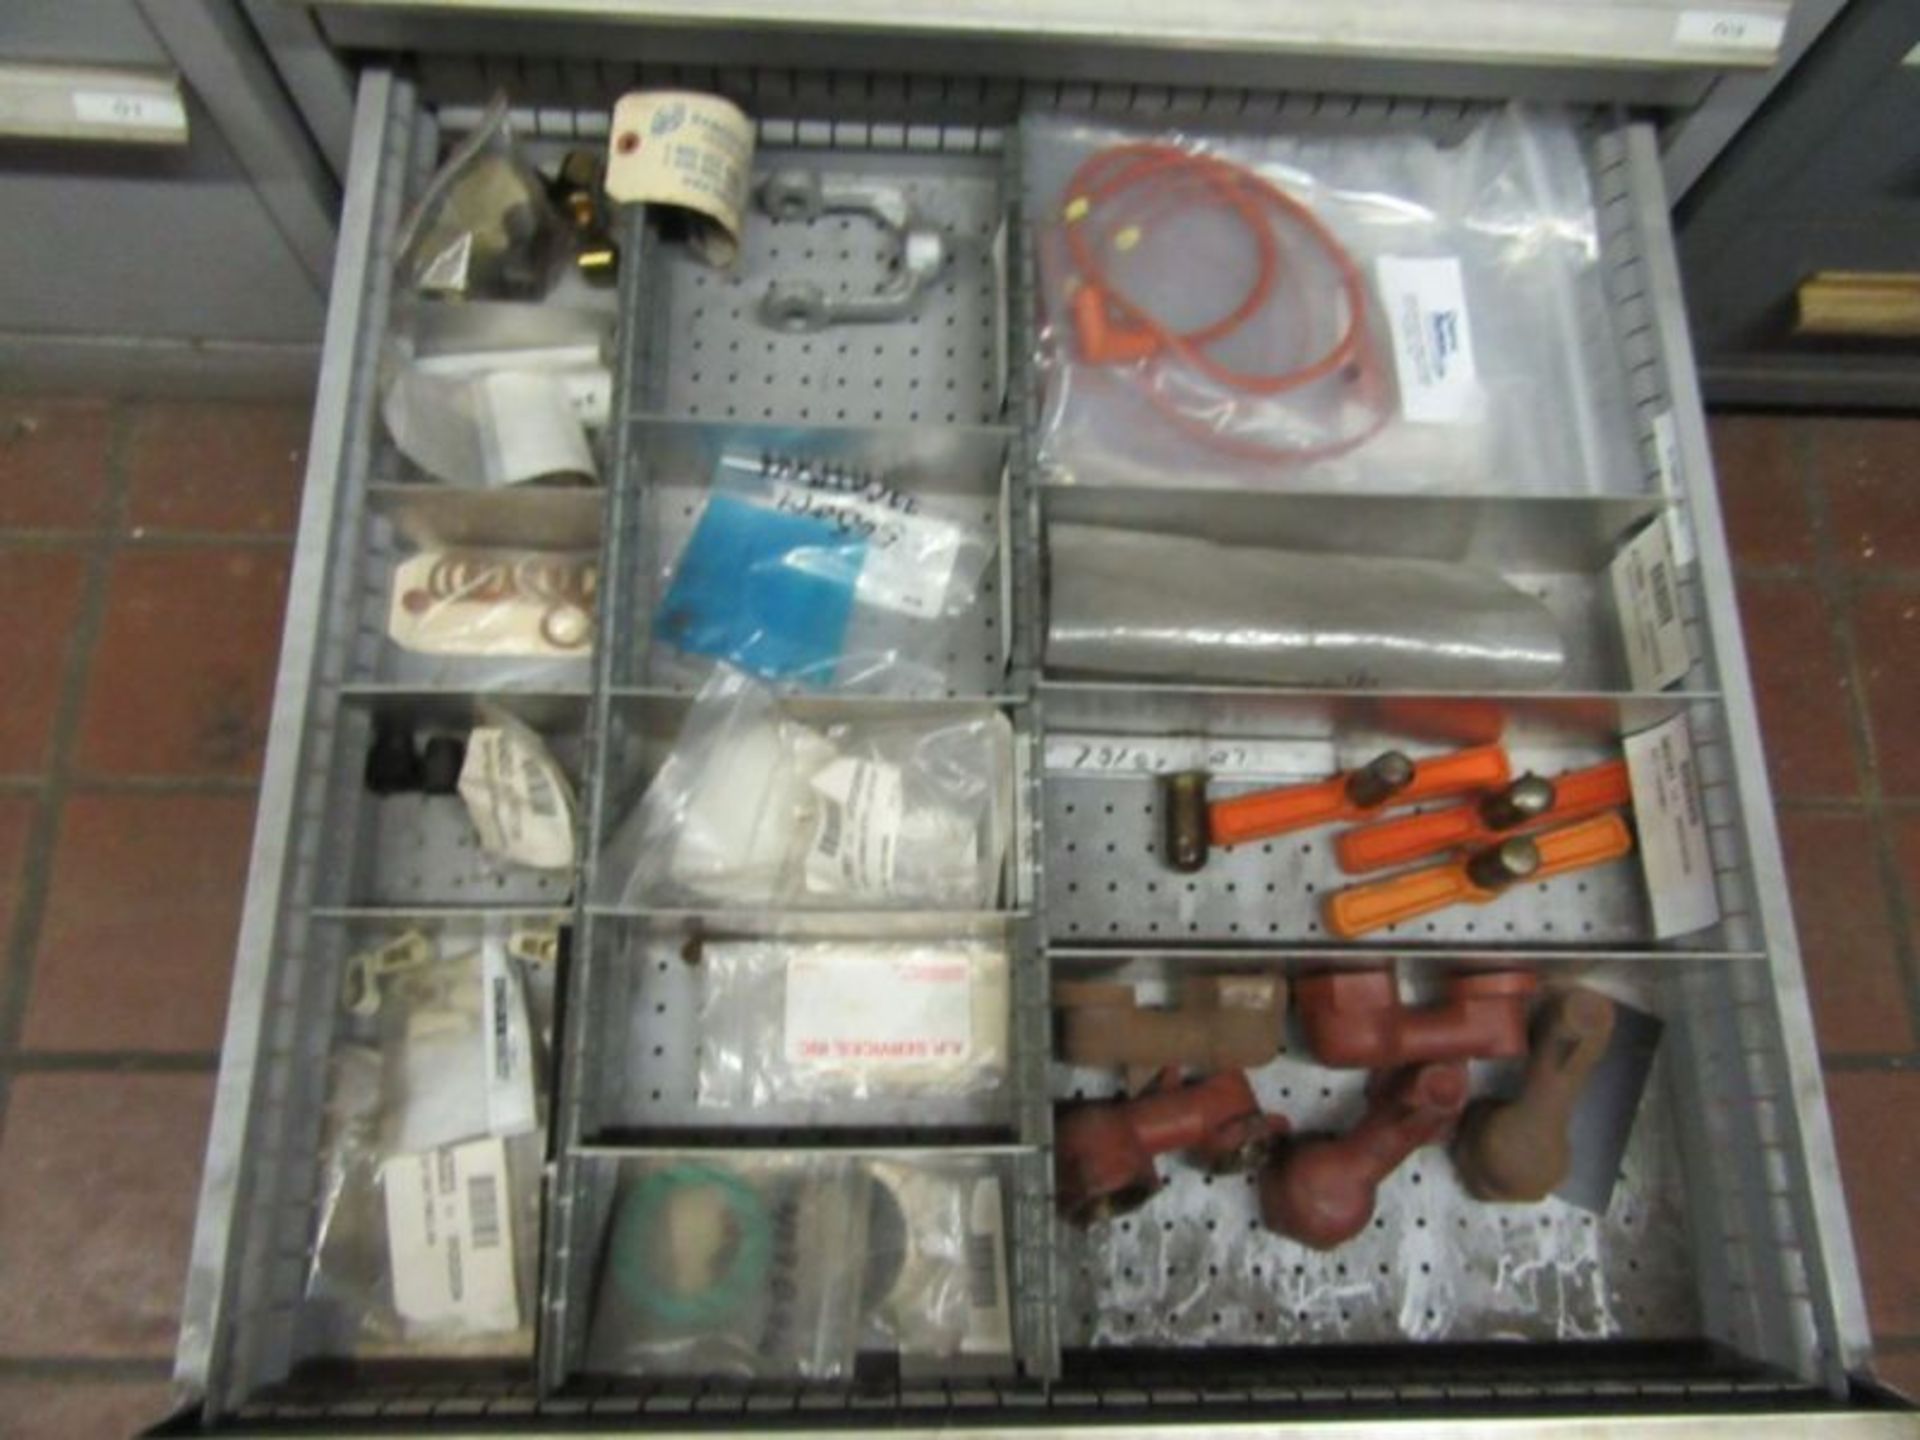 CONTENTS OF CABINET - SEAT VALVES, O RING VALVES, GASKET, MOTHER BOARD PART… - Image 8 of 10